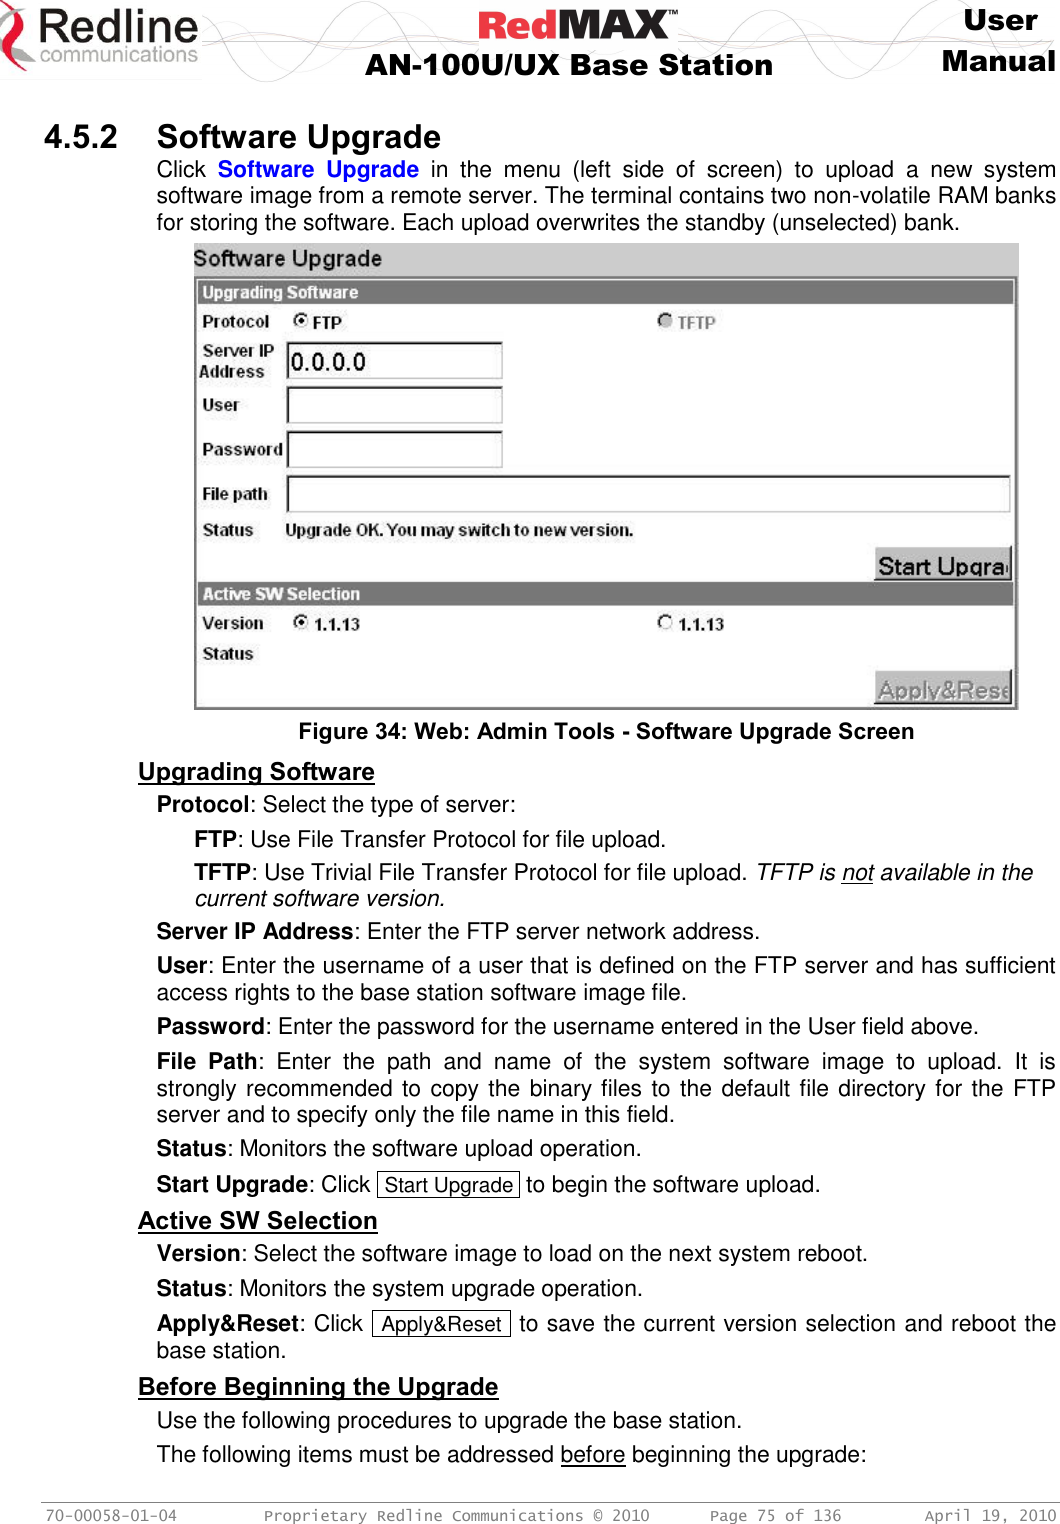     User  AN-100U/UX Base Station Manual   70-00058-01-04  Proprietary Redline Communications © 2010   Page 75 of 136  April 19, 2010  4.5.2 Software Upgrade Click  Software  Upgrade  in  the  menu  (left  side  of  screen)  to  upload  a  new  system software image from a remote server. The terminal contains two non-volatile RAM banks for storing the software. Each upload overwrites the standby (unselected) bank.  Figure 34: Web: Admin Tools - Software Upgrade Screen Upgrading Software Protocol: Select the type of server: FTP: Use File Transfer Protocol for file upload. TFTP: Use Trivial File Transfer Protocol for file upload. TFTP is not available in the current software version. Server IP Address: Enter the FTP server network address. User: Enter the username of a user that is defined on the FTP server and has sufficient access rights to the base station software image file. Password: Enter the password for the username entered in the User field above. File  Path:  Enter  the  path  and  name  of  the  system  software  image  to  upload.  It  is strongly recommended to copy the binary files to the default file directory for the FTP server and to specify only the file name in this field. Status: Monitors the software upload operation. Start Upgrade: Click  Start Upgrade  to begin the software upload. Active SW Selection Version: Select the software image to load on the next system reboot. Status: Monitors the system upgrade operation. Apply&amp;Reset: Click  Apply&amp;Reset  to save the current version selection and reboot the base station. Before Beginning the Upgrade Use the following procedures to upgrade the base station. The following items must be addressed before beginning the upgrade: 